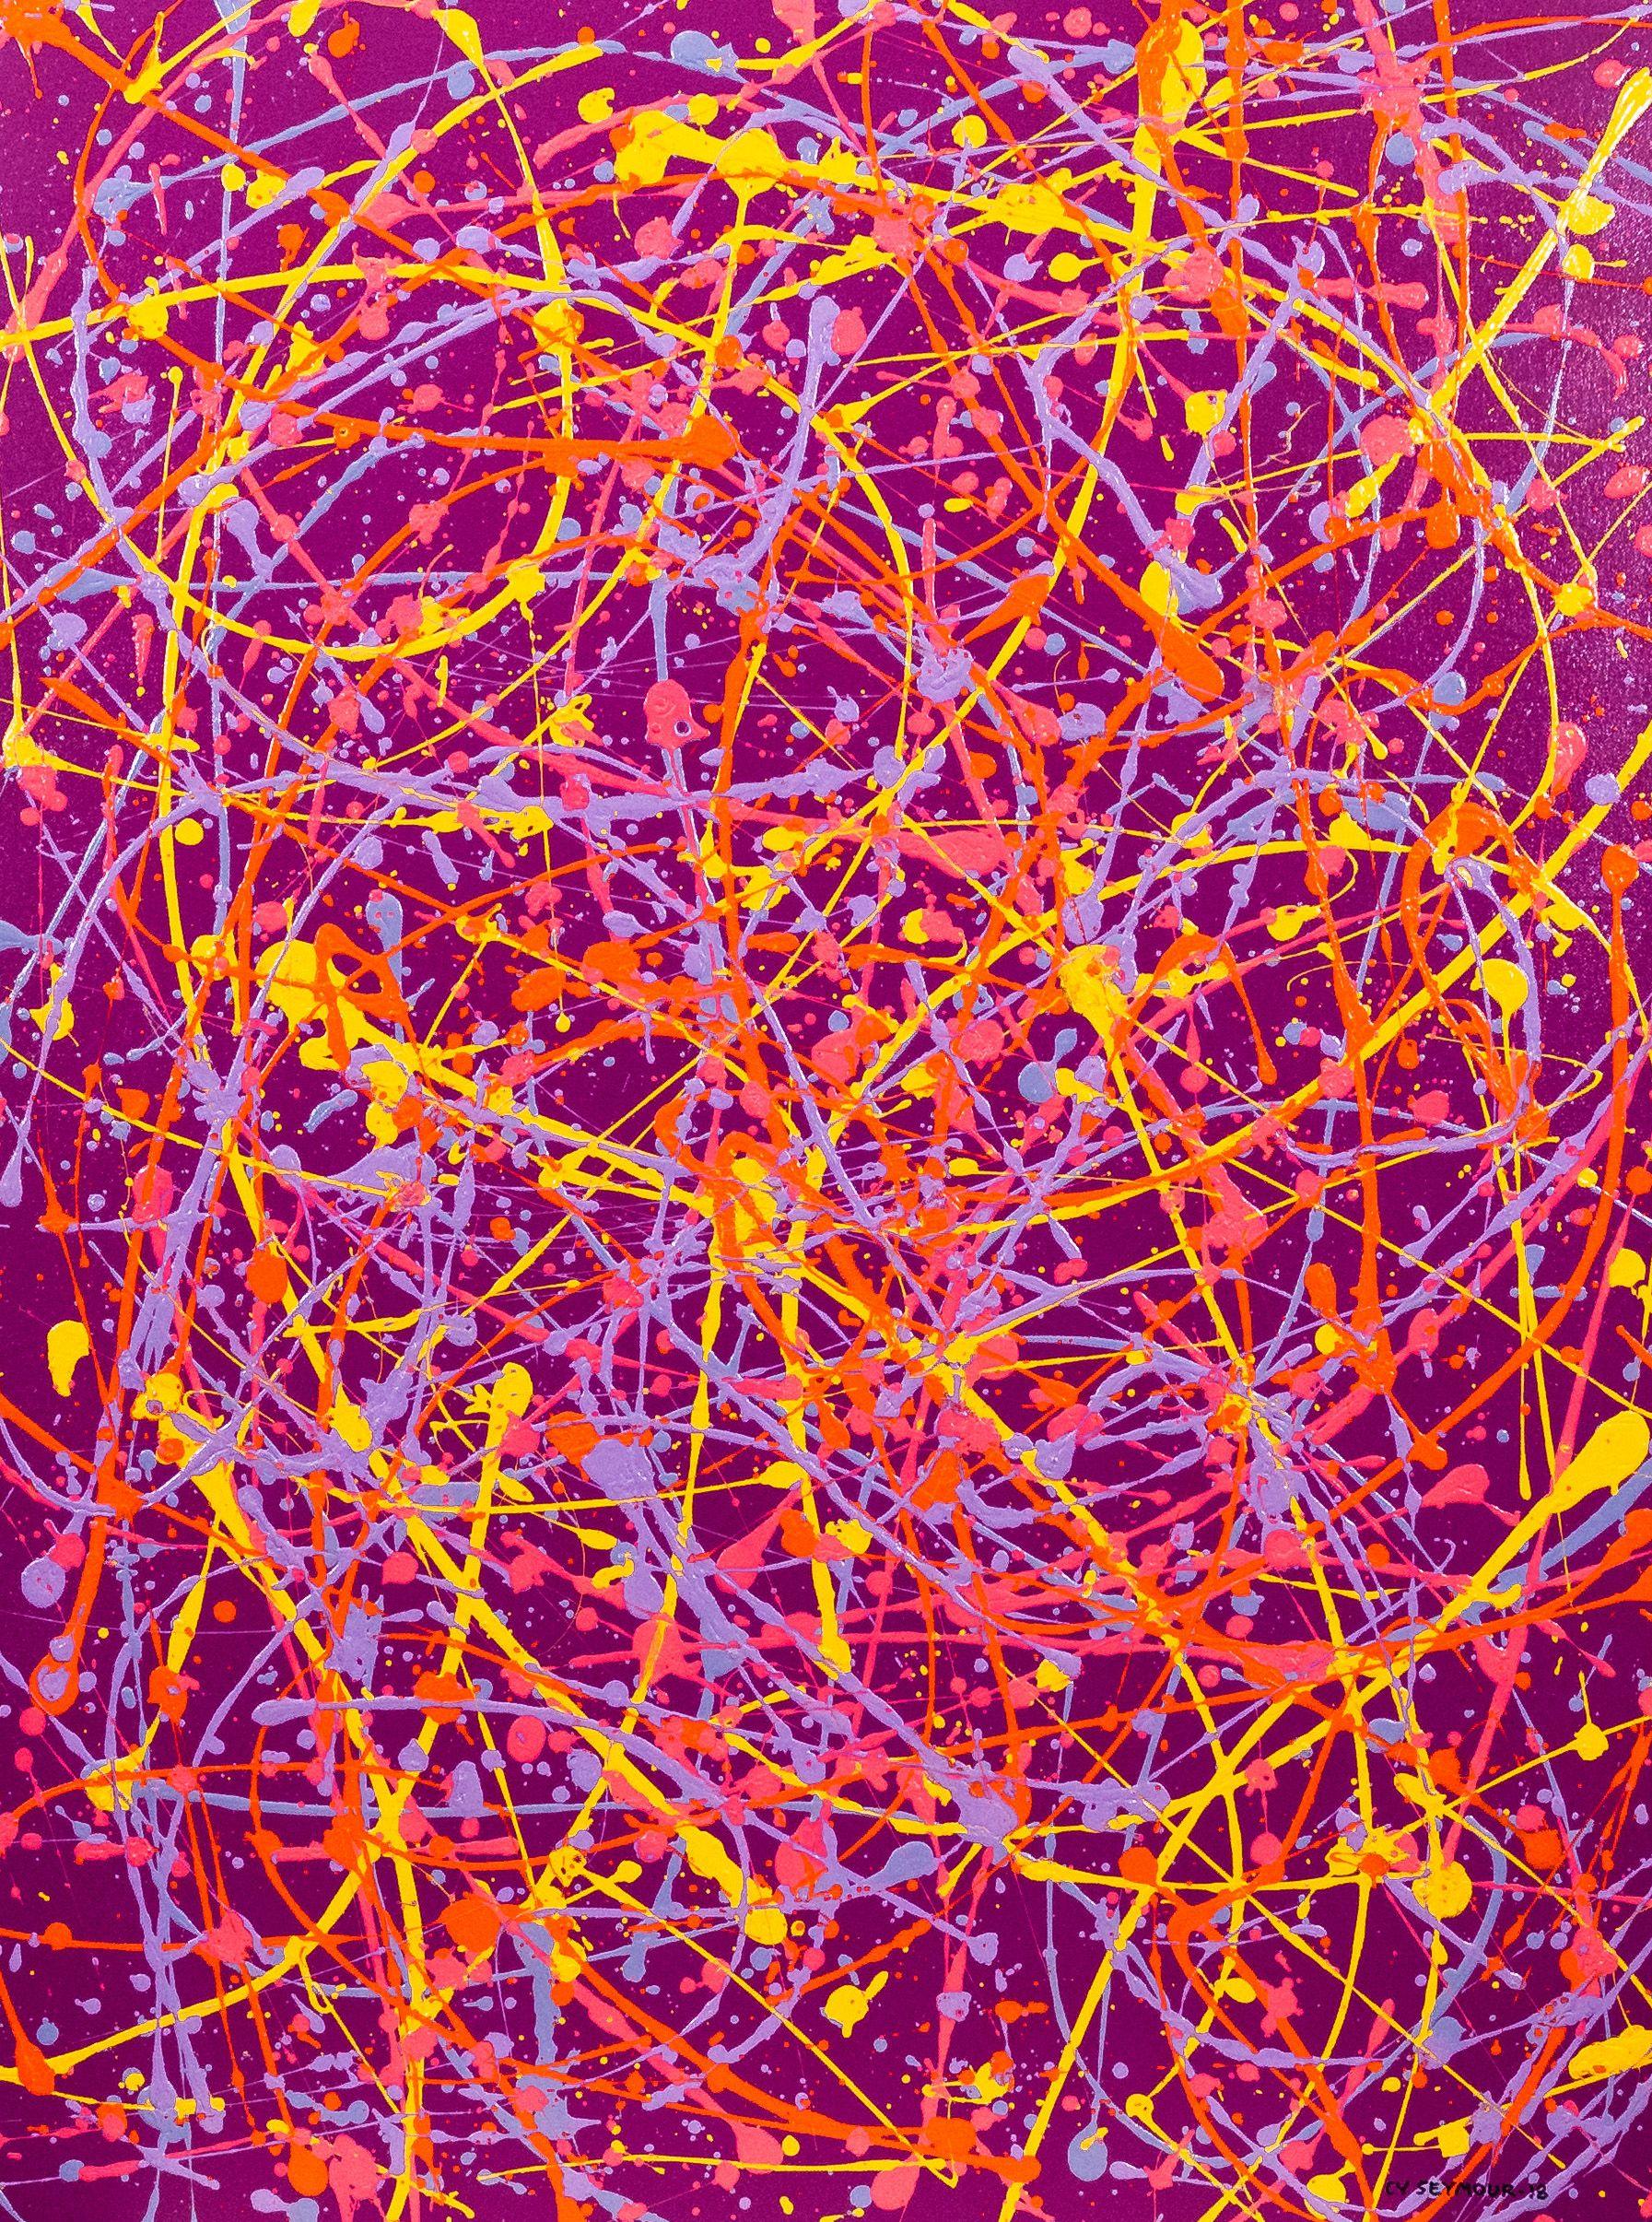 Hot Pink, French Lavender, Peachy Orange, Lemon Yellow on Matte Indigo.  Can be presented horizontally or vertically. :: Painting :: Abstract Expressionism :: This piece comes with an official certificate of authenticity signed by the artist ::